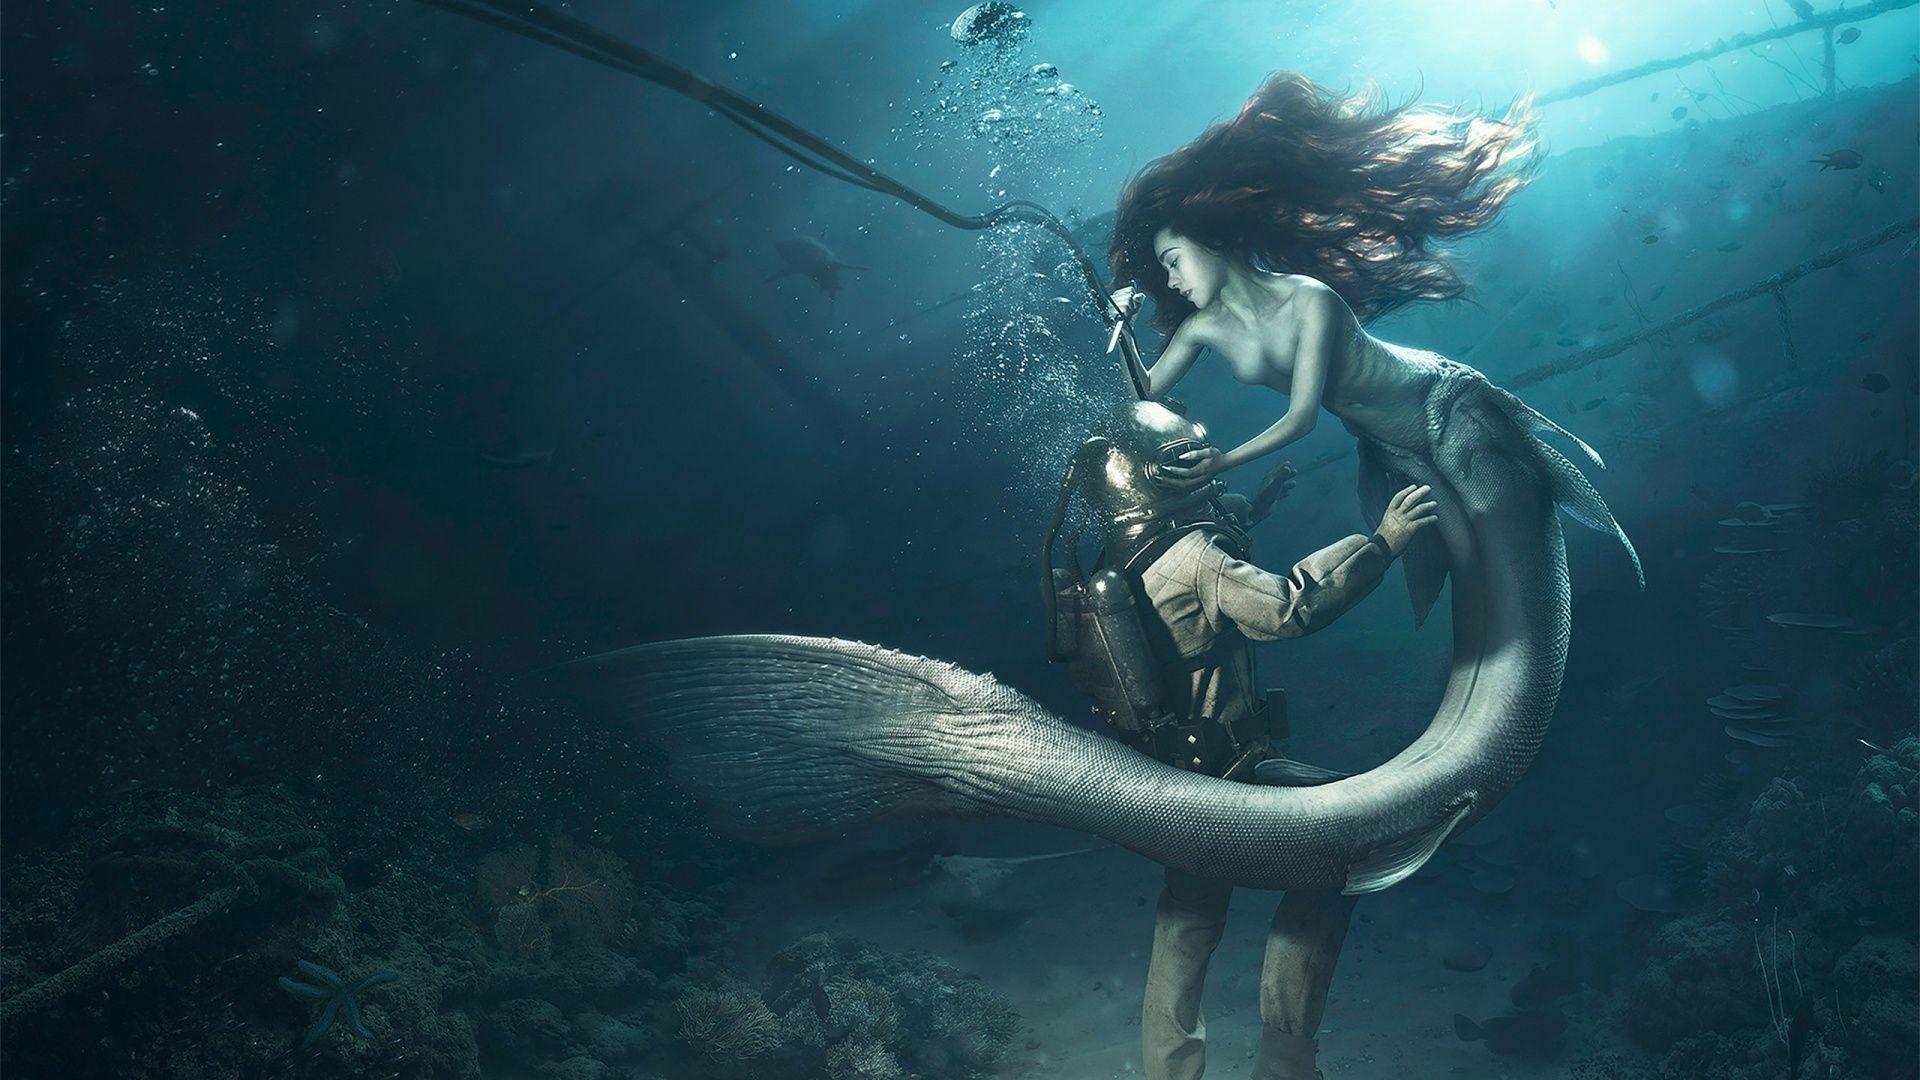 Diver and the Mermaid Wallpaper in jpg format for free download